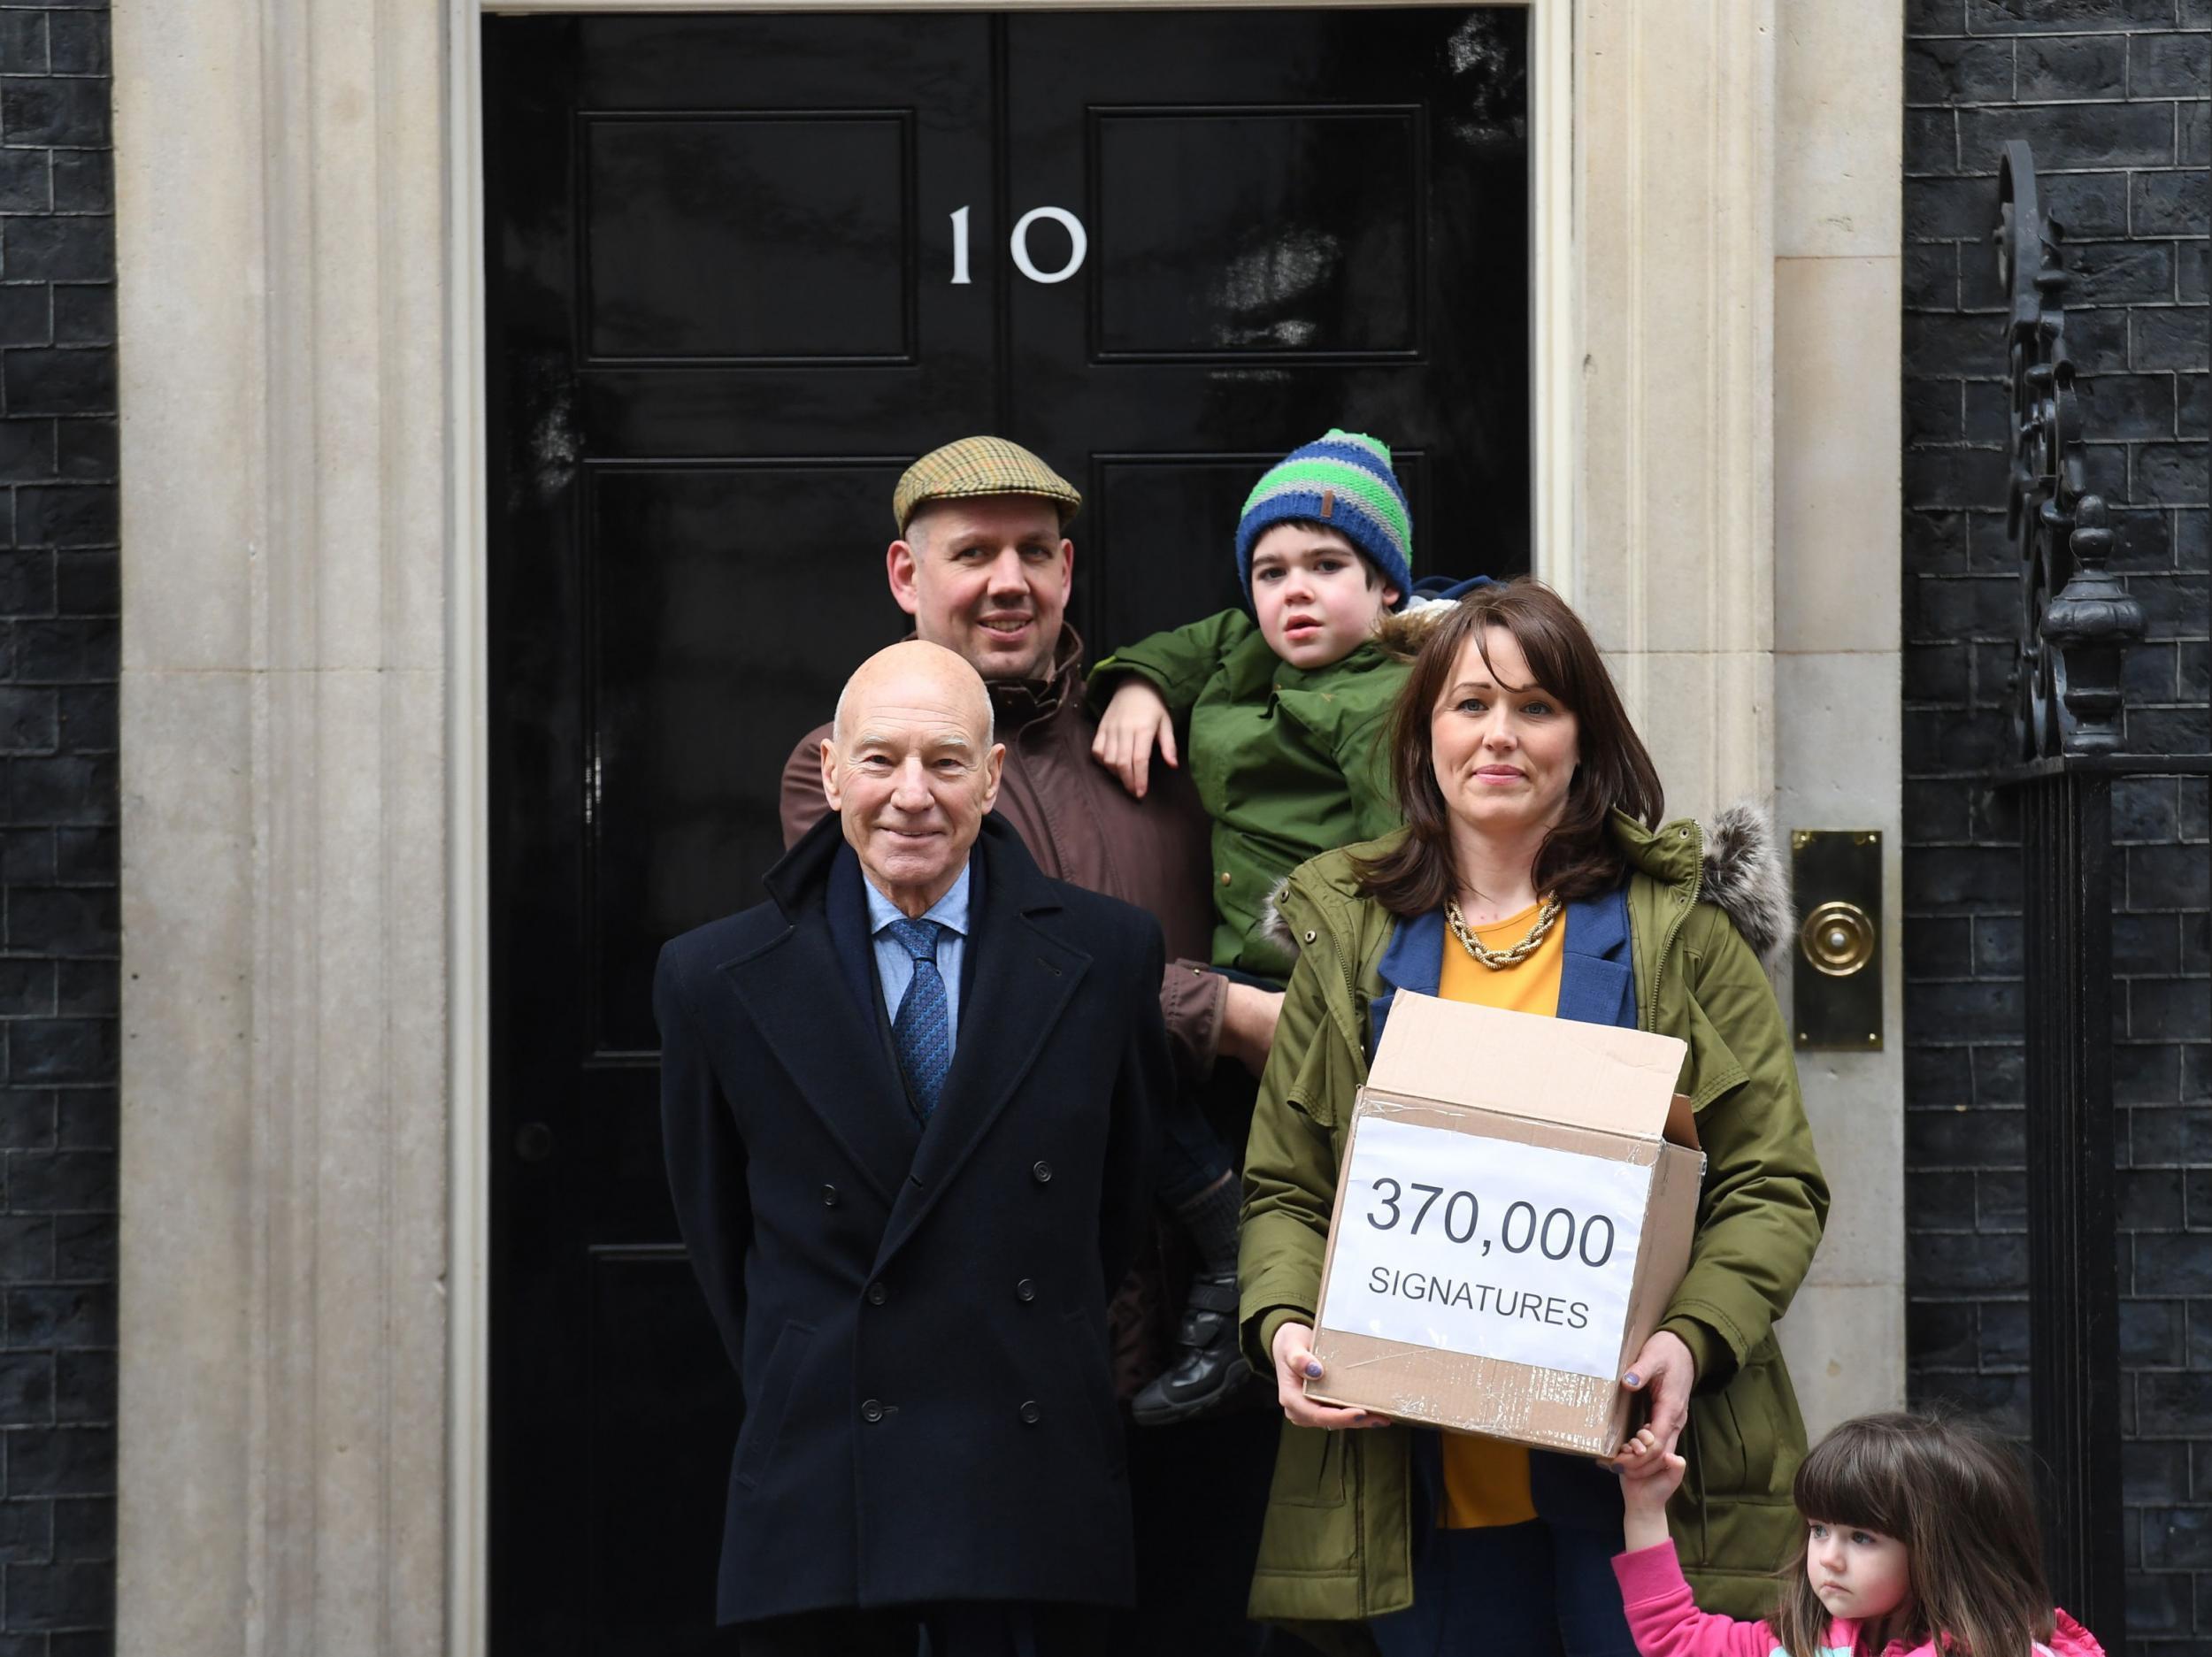 Six-year-old Alfie Dingley, his parents Drew Dingley and Hannah Deacon and actor Sir Patrick Stewart (left) walk up Whitehall in London before handing in a petition to Number 10 Downing Street asking for Alfie to be given medicinal cannabis to treat his epilepsy